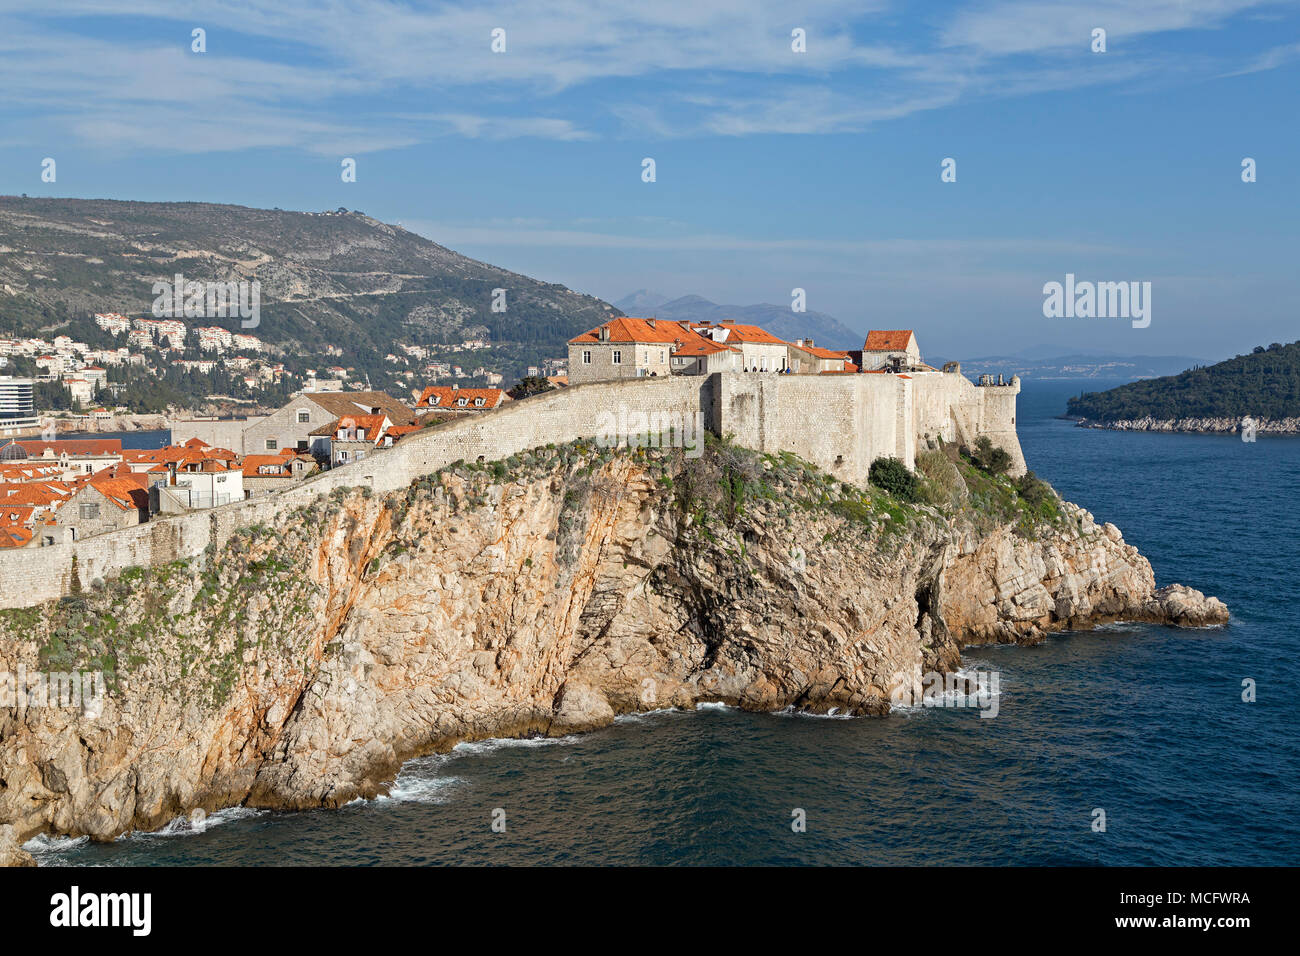 town wall and old town, Dubrovnik, Croatia Stock Photo